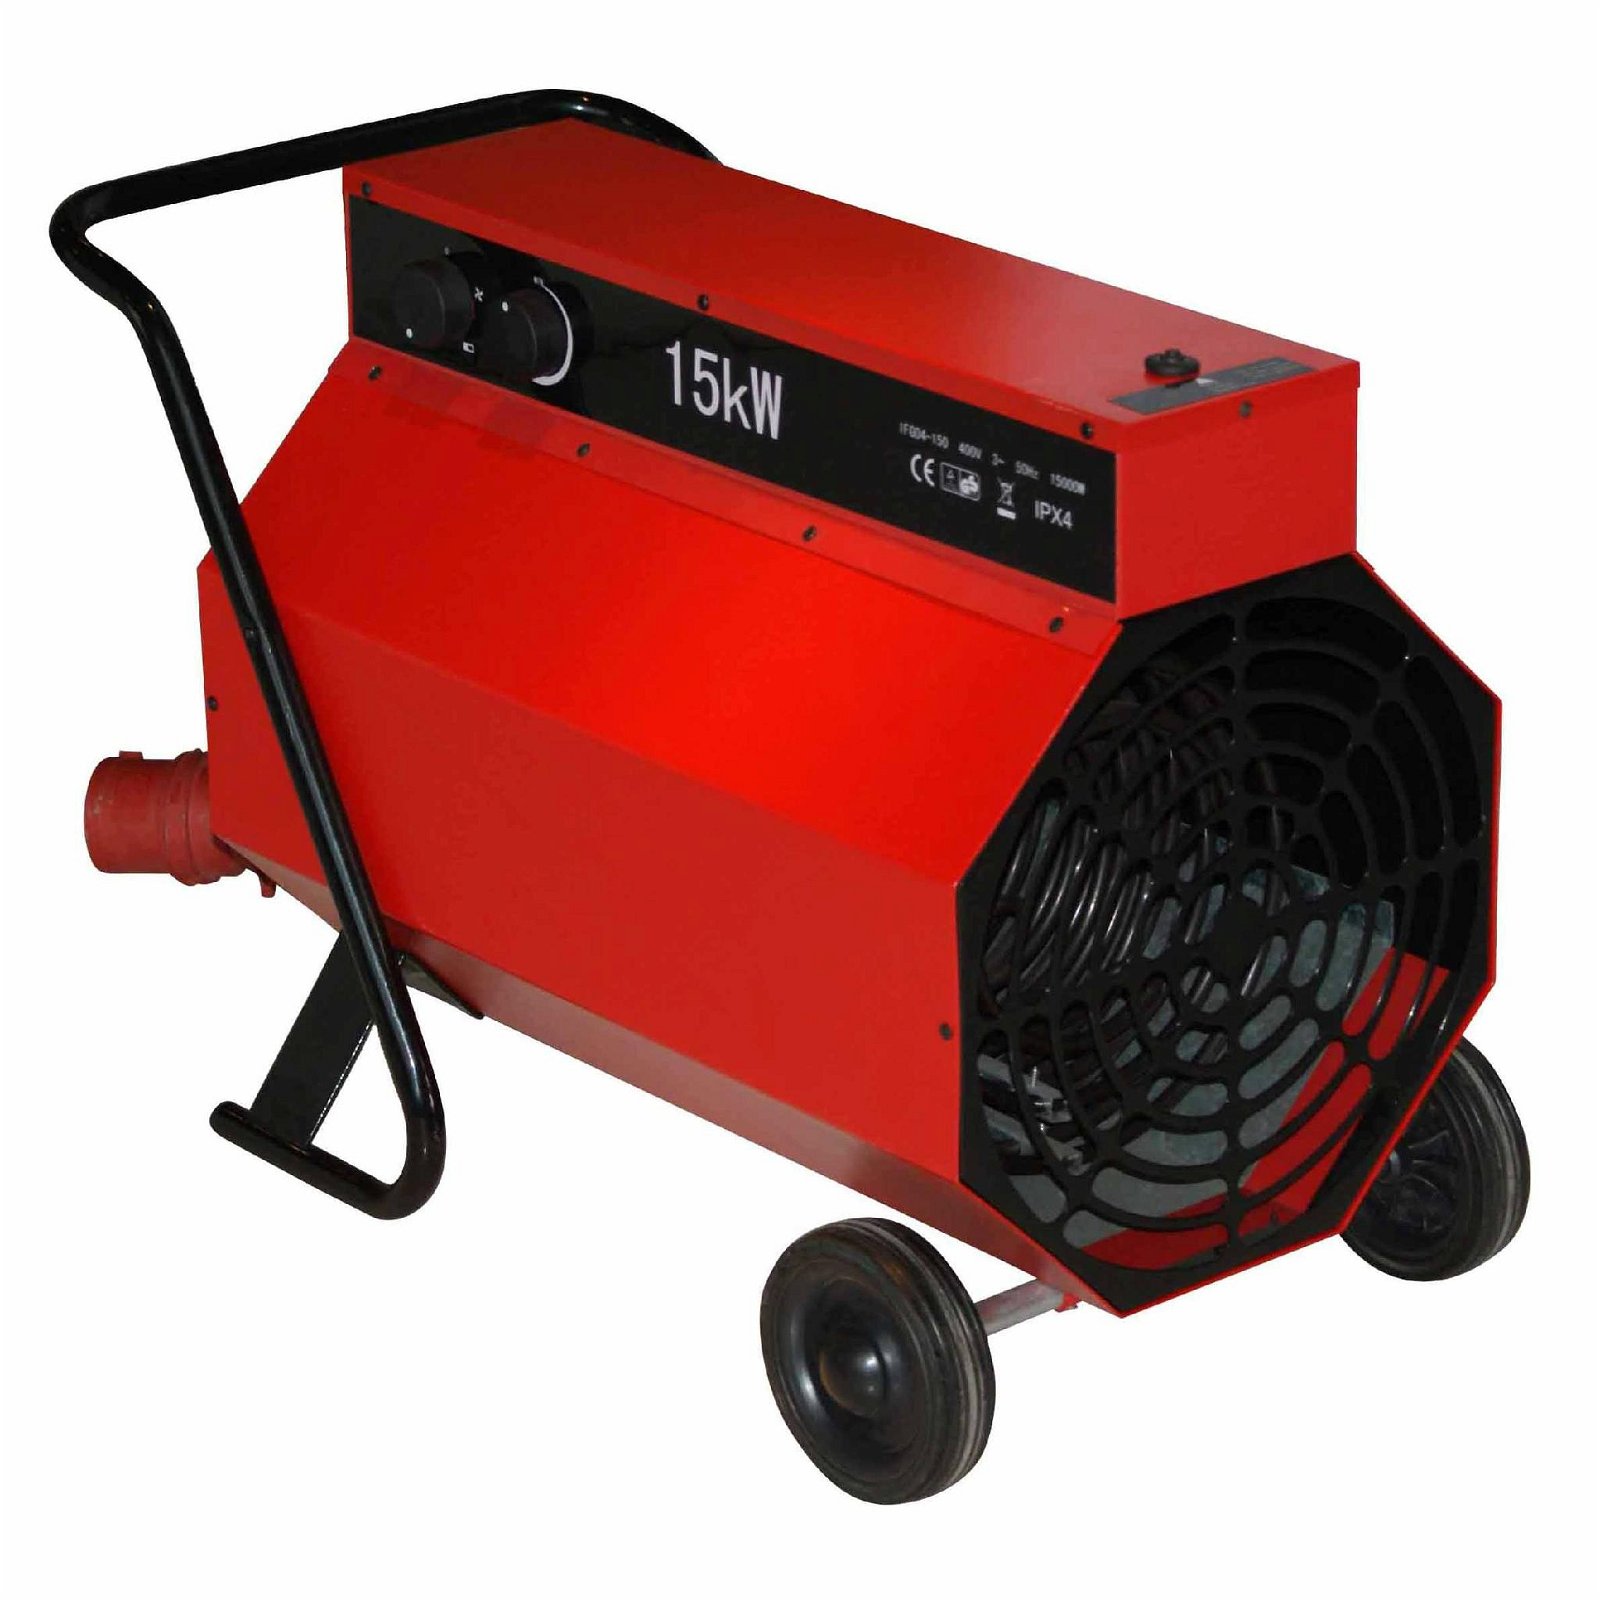 Portable industrial space heater with handle and wheel